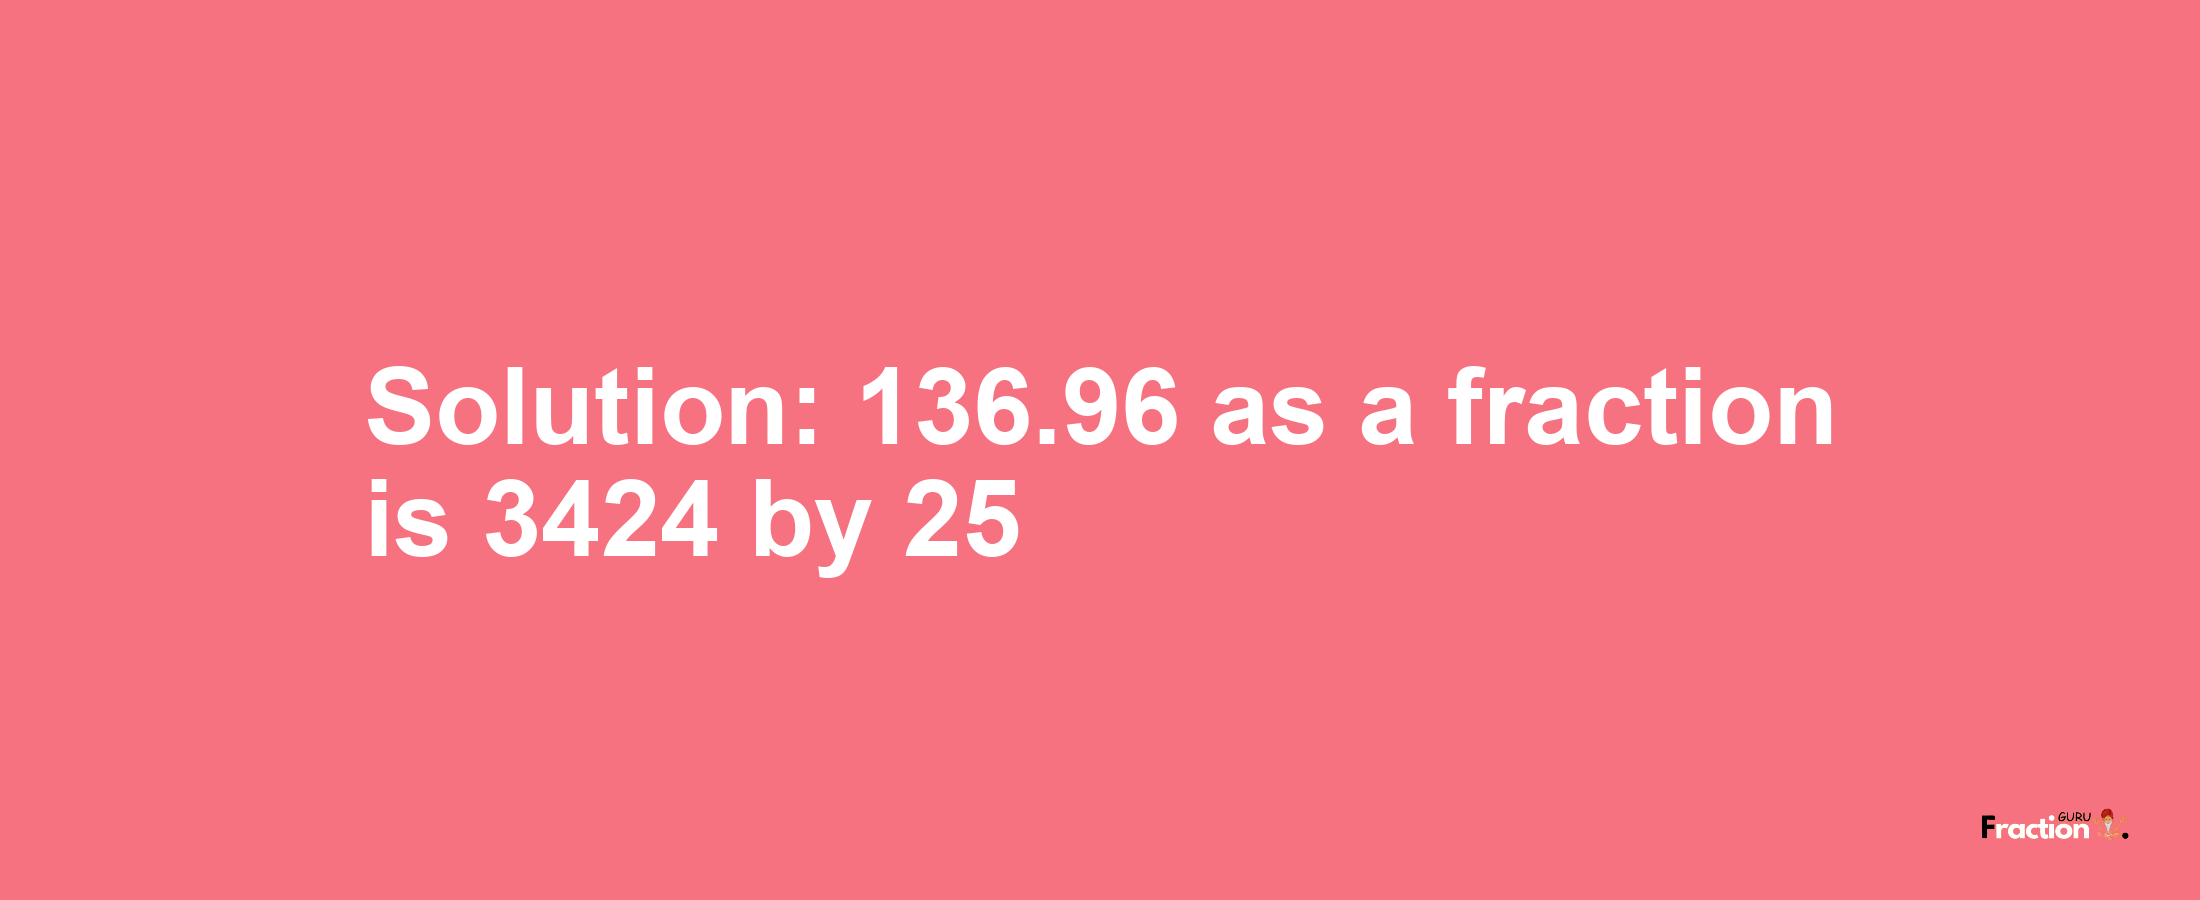 Solution:136.96 as a fraction is 3424/25